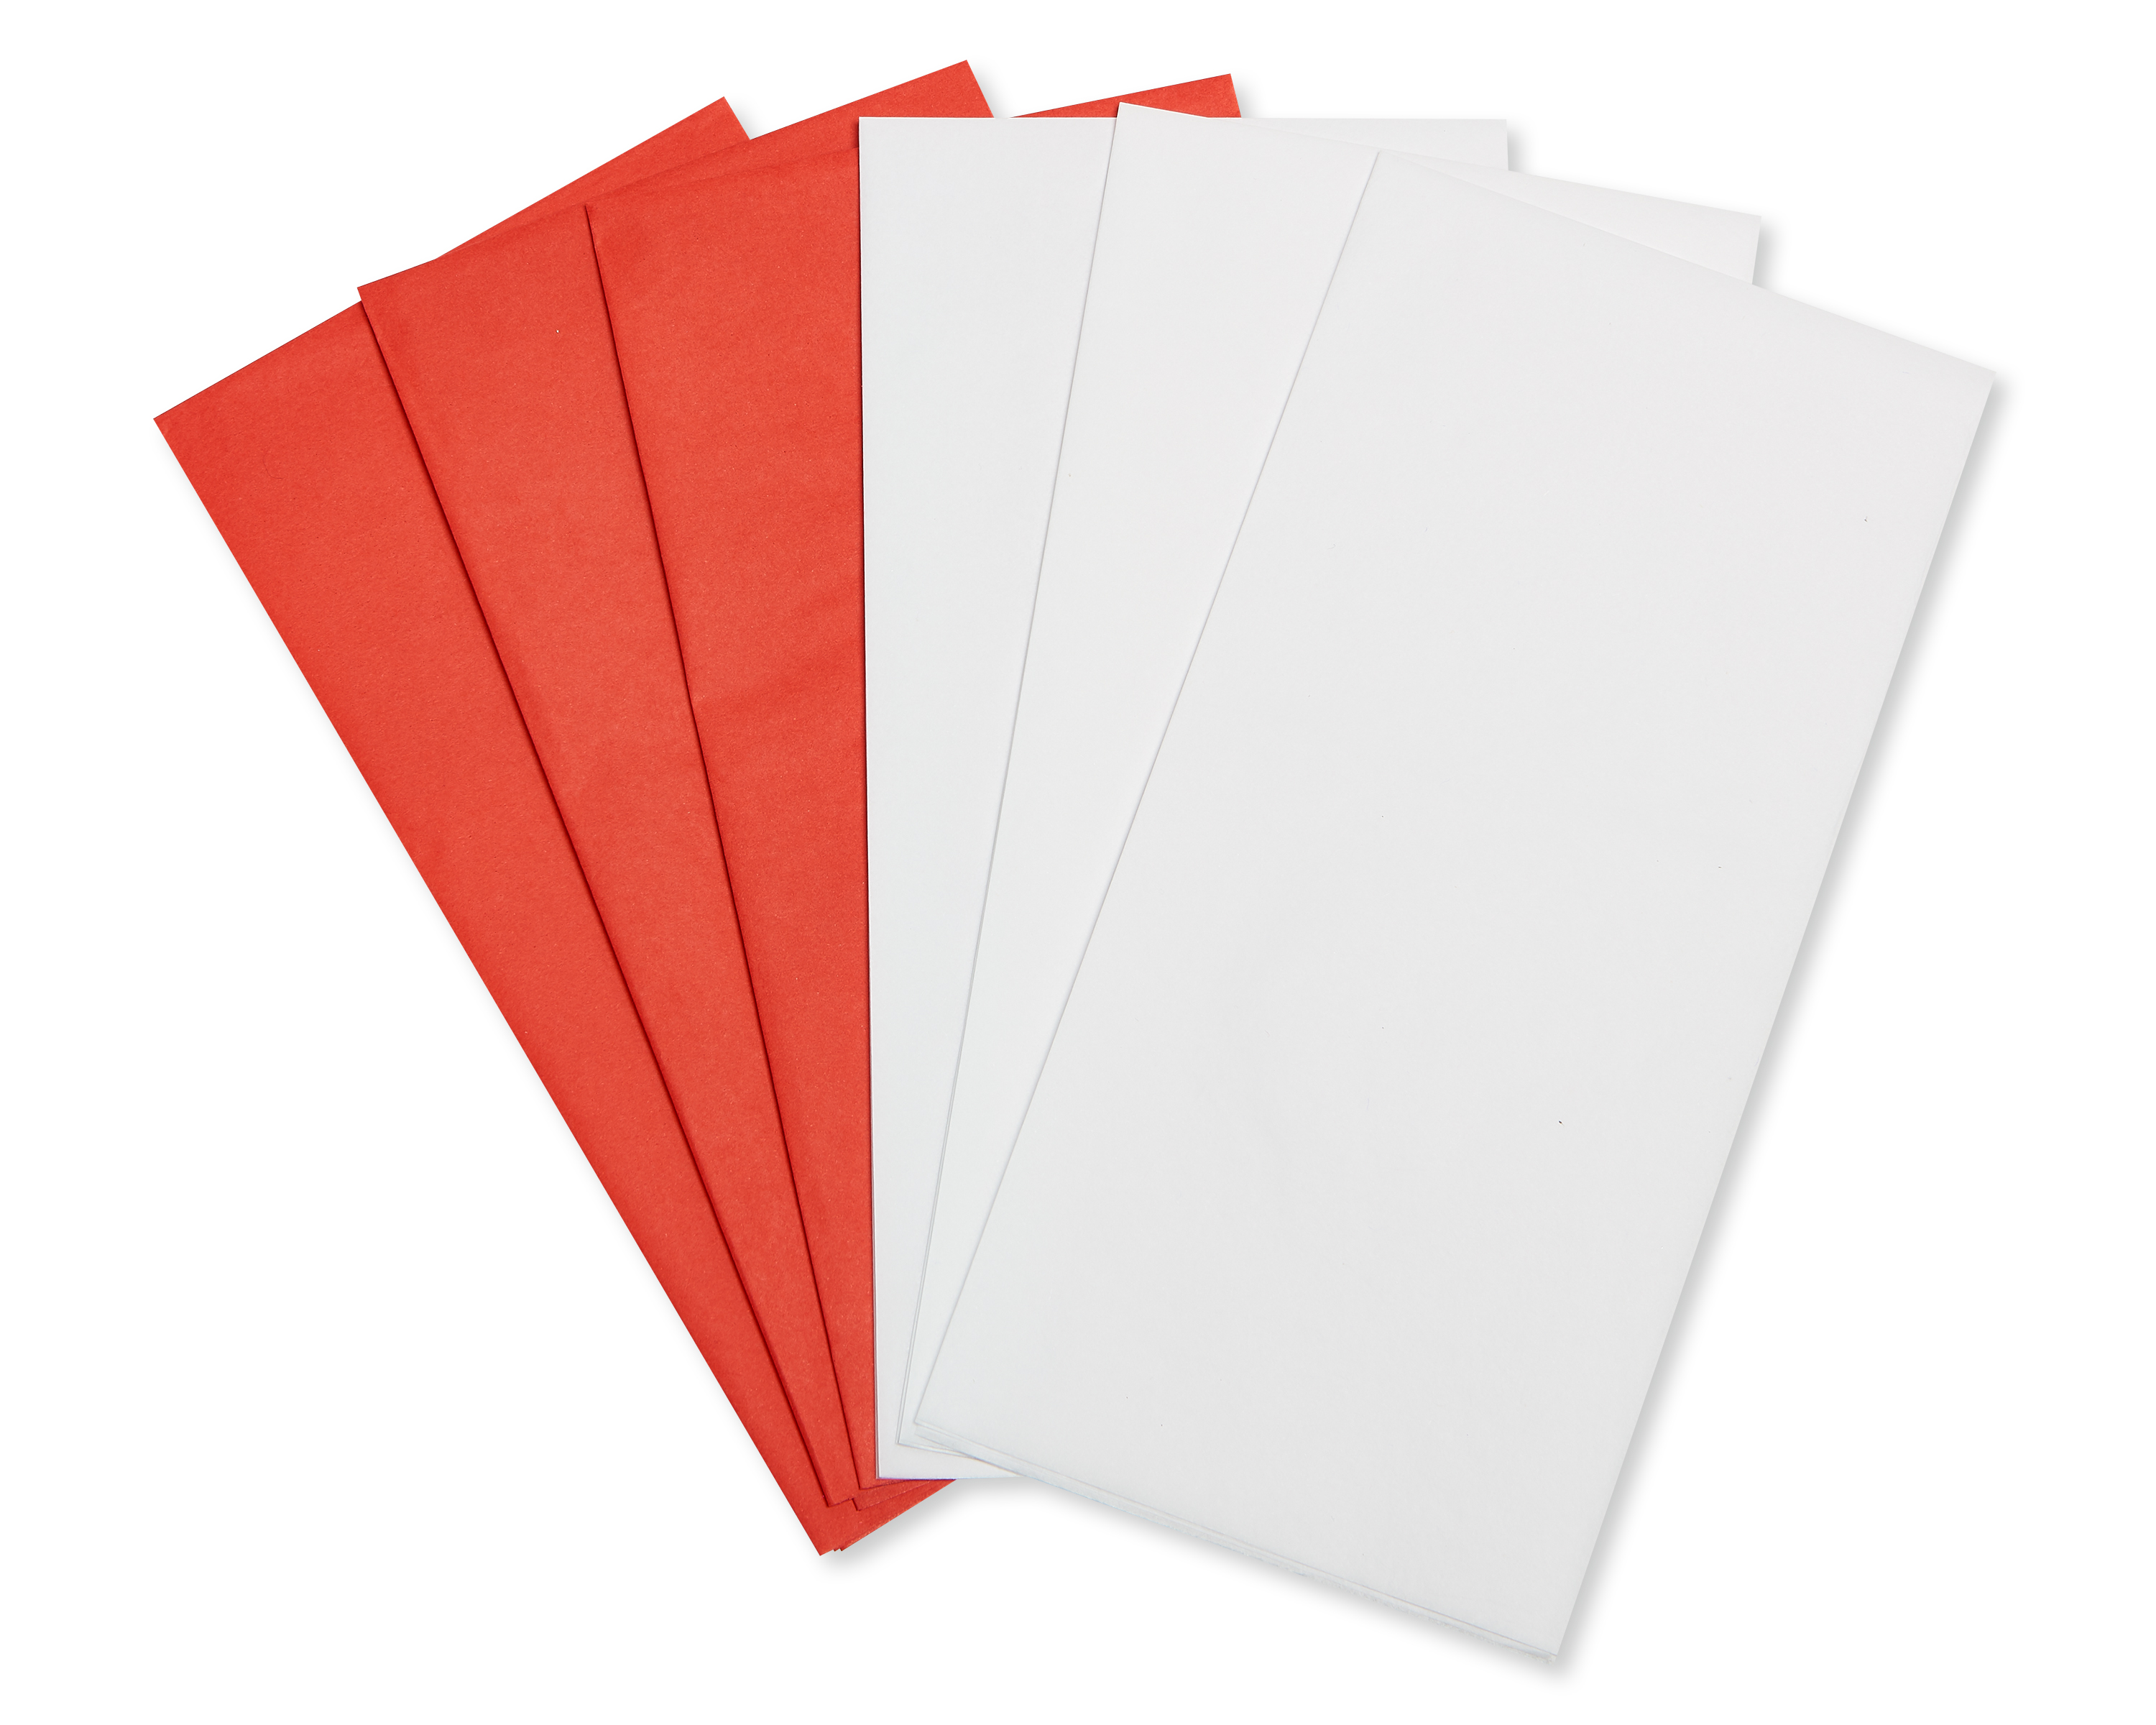 American Greetings Bulk Tissue Paper, Red and White, 20 x 20 (125-Sheets)